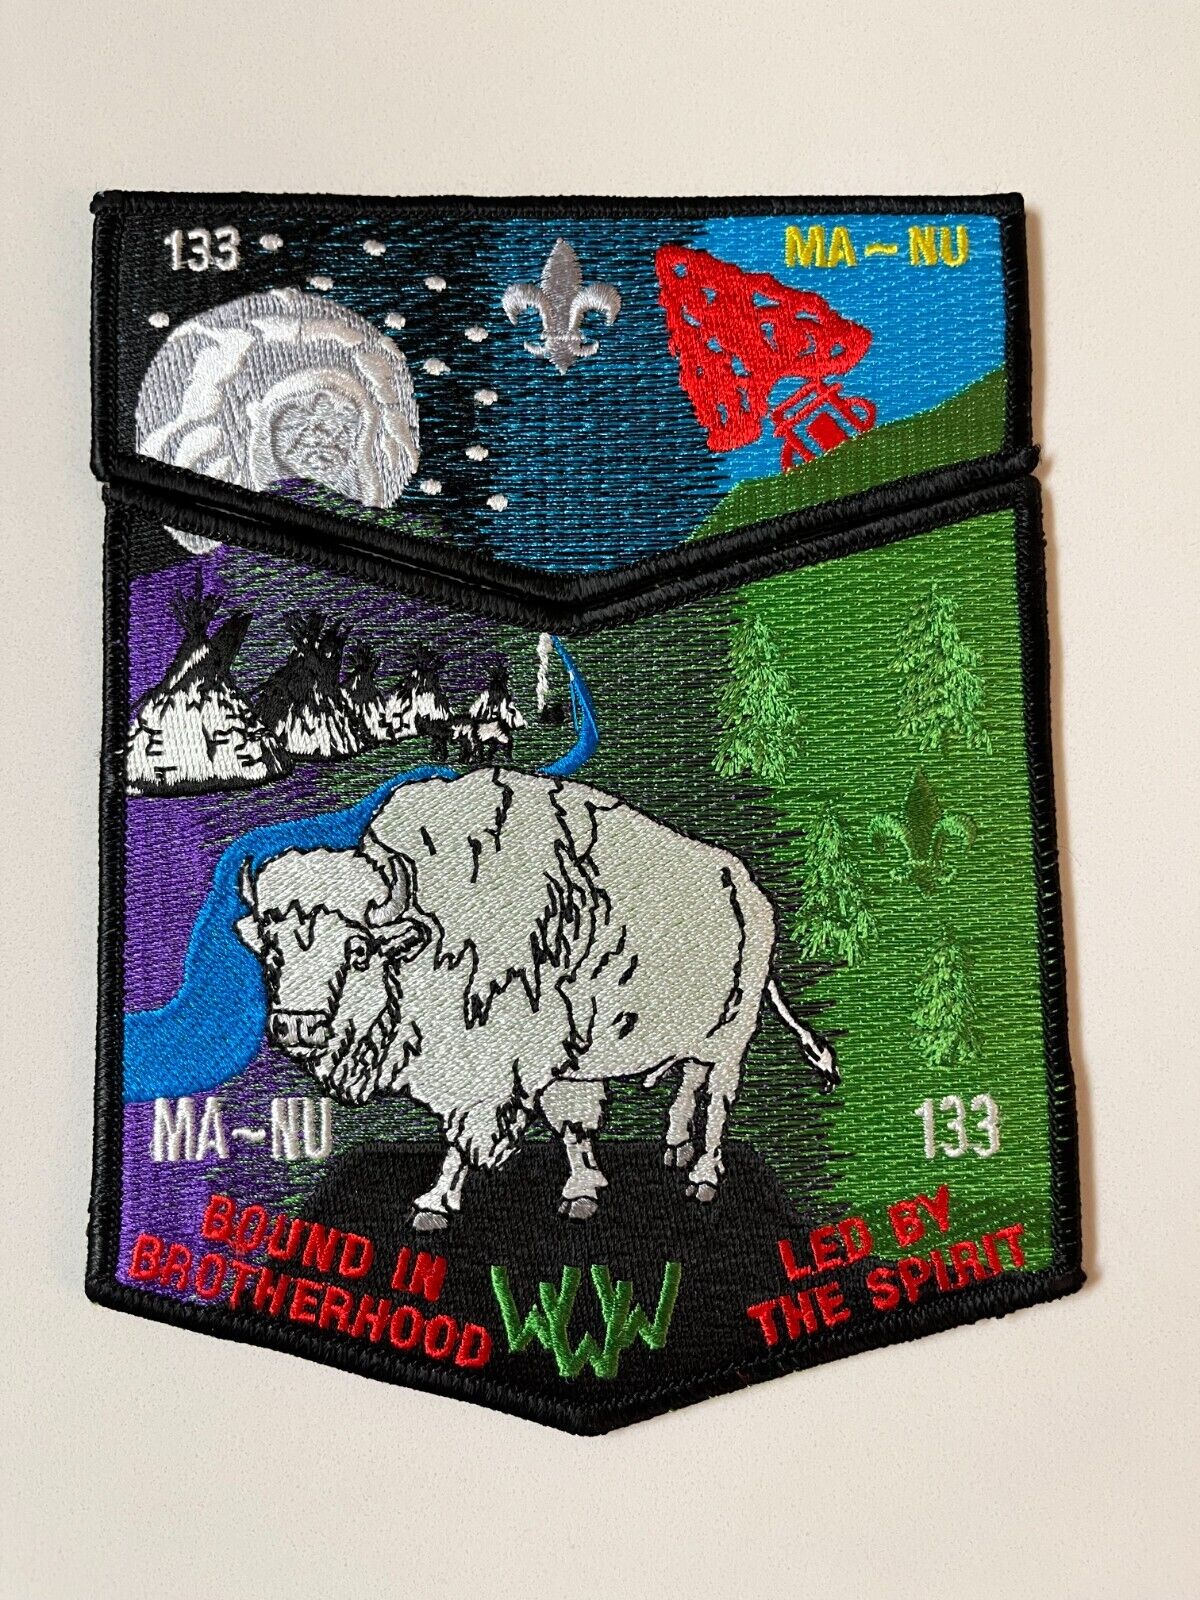 Boy Scout OA 133 Ma-Nu Lodge Bound In Brotherhood Led by the Spirit 2 Piece Flap